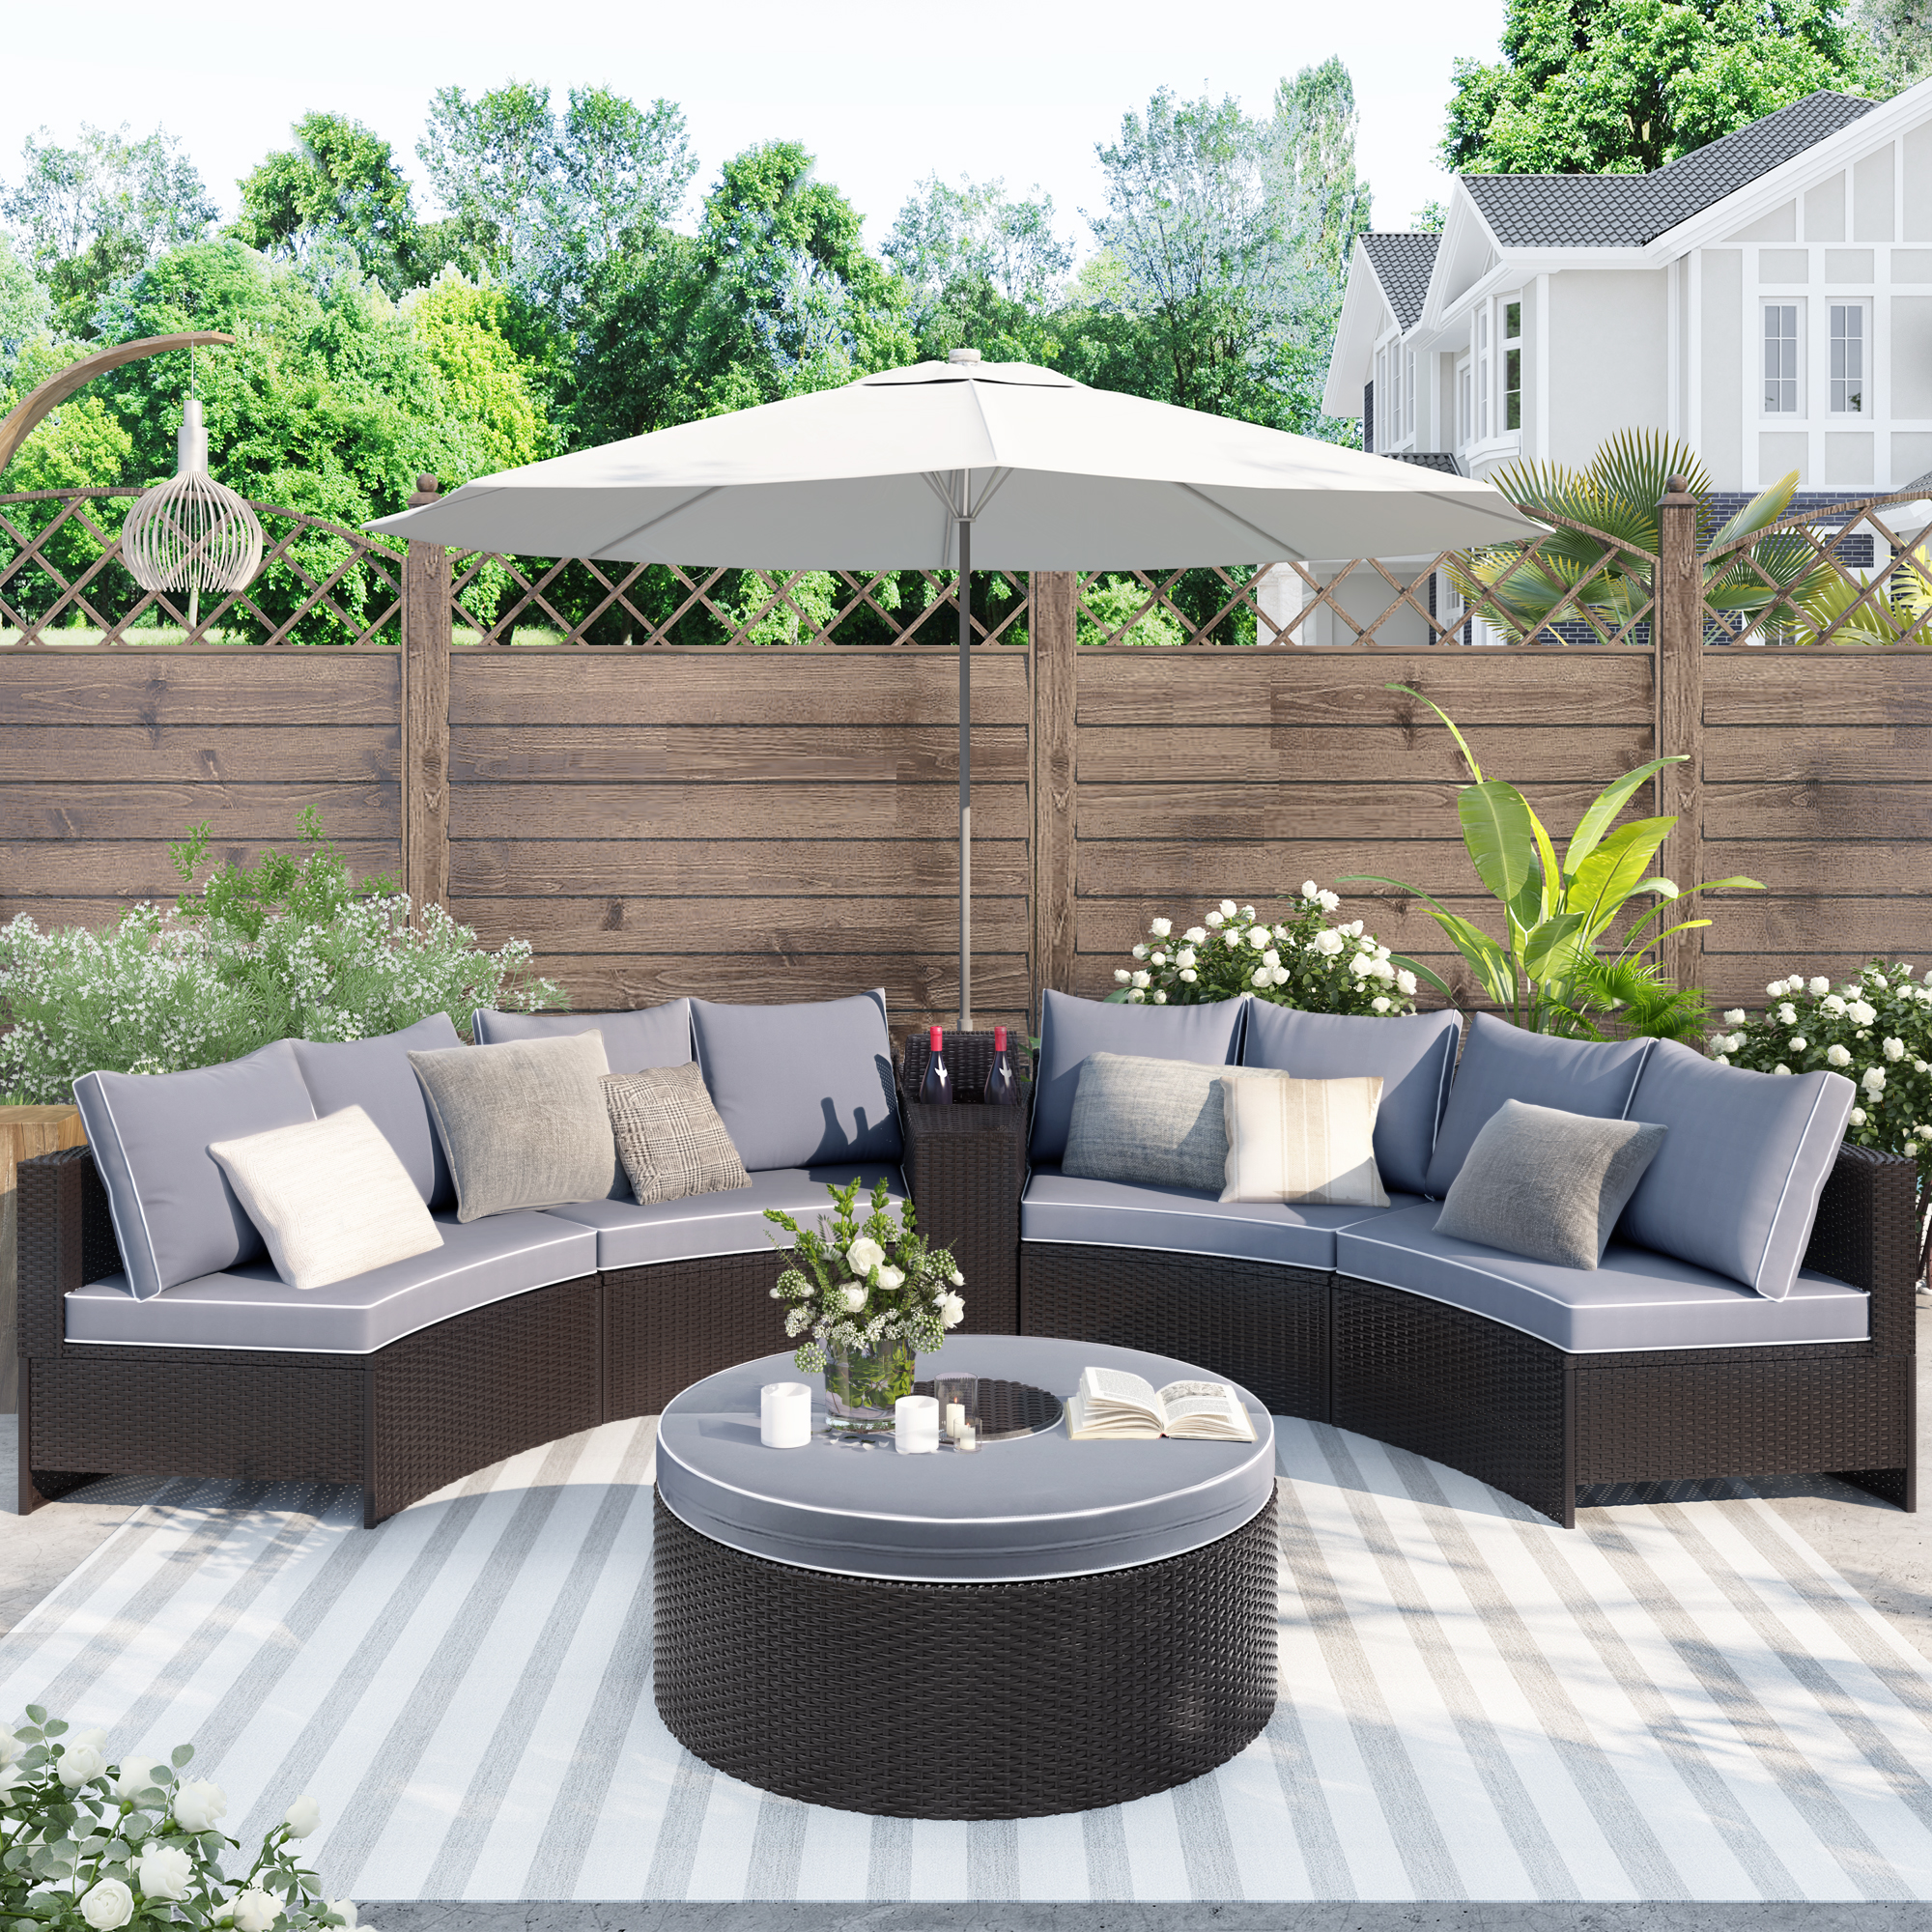 6-Pieces Outdoor PE Wicker Conversation Furniture Set Sectional Half Round Patio Rattan Sofa Set with Storage Side Table for Umbrella and Round Coffee Table, Gray Cushions + Brown Wicker - image 2 of 8